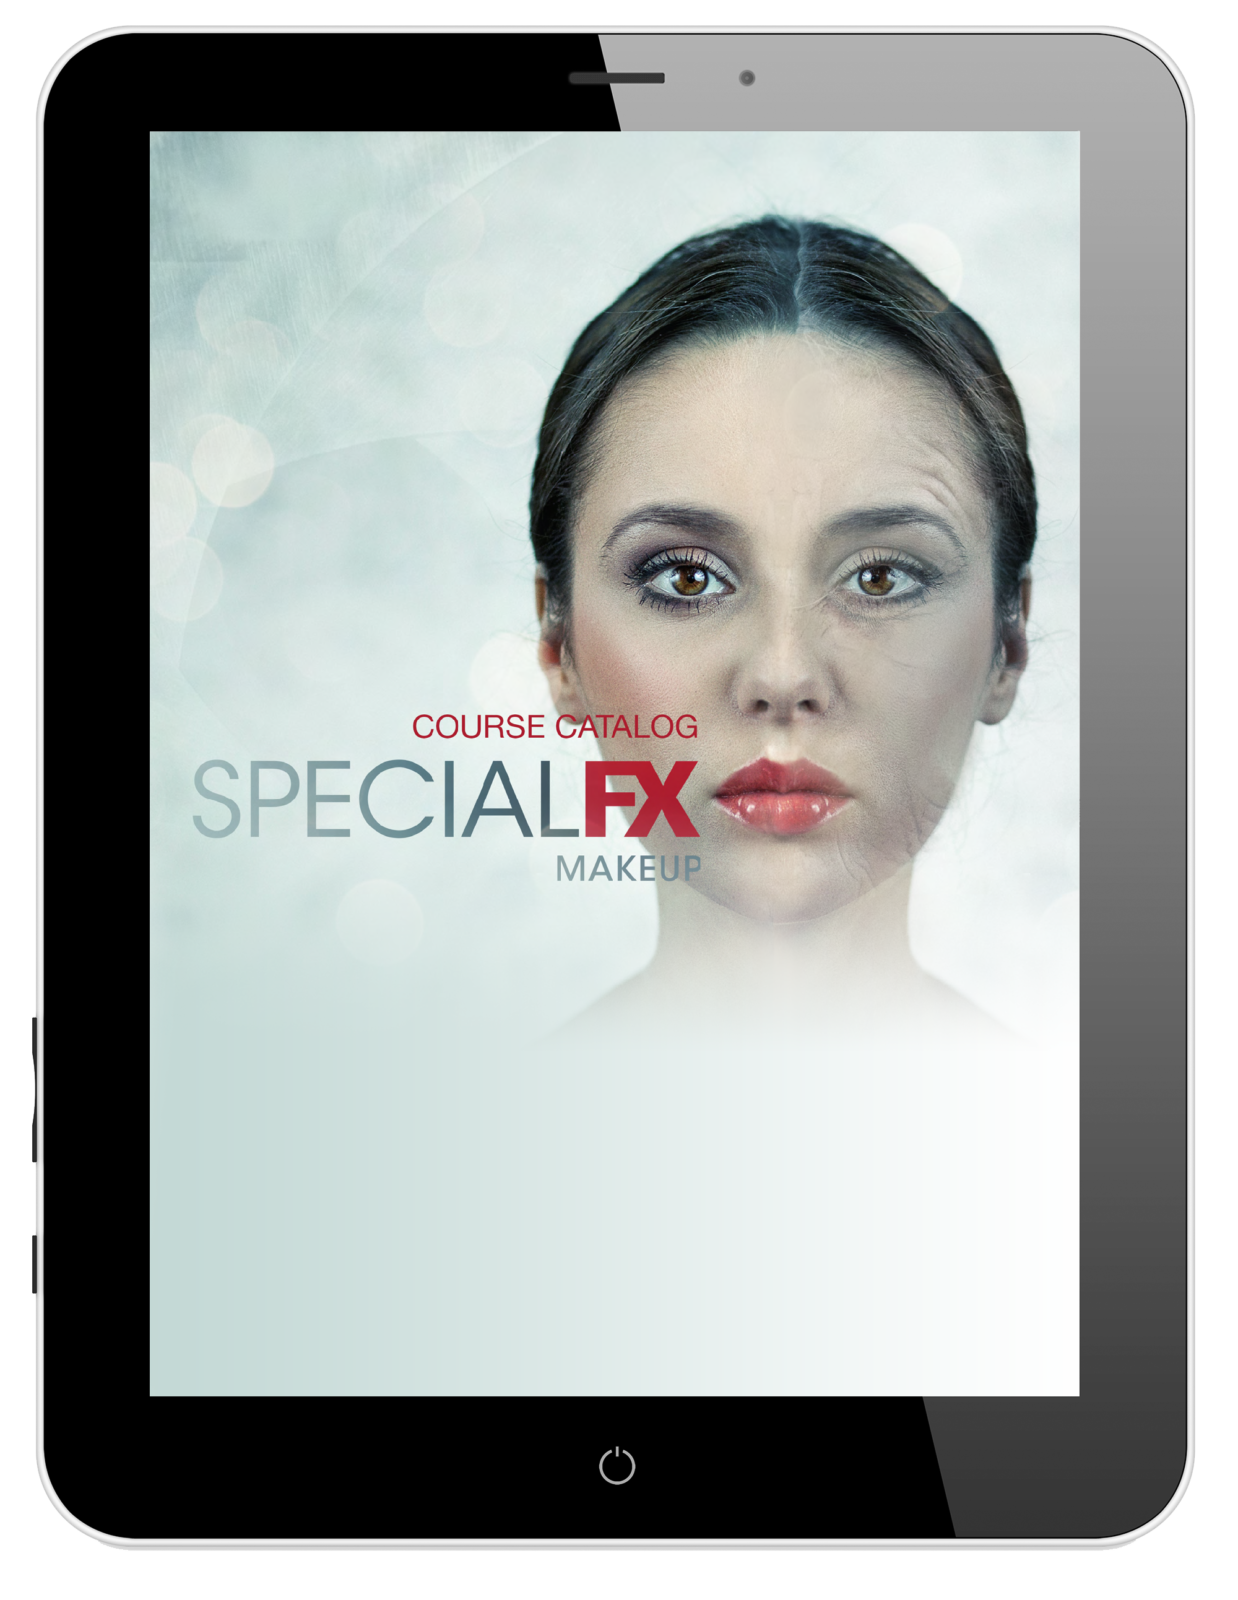 Photo Makeup Effects Free - Life Style By Modernstork.com